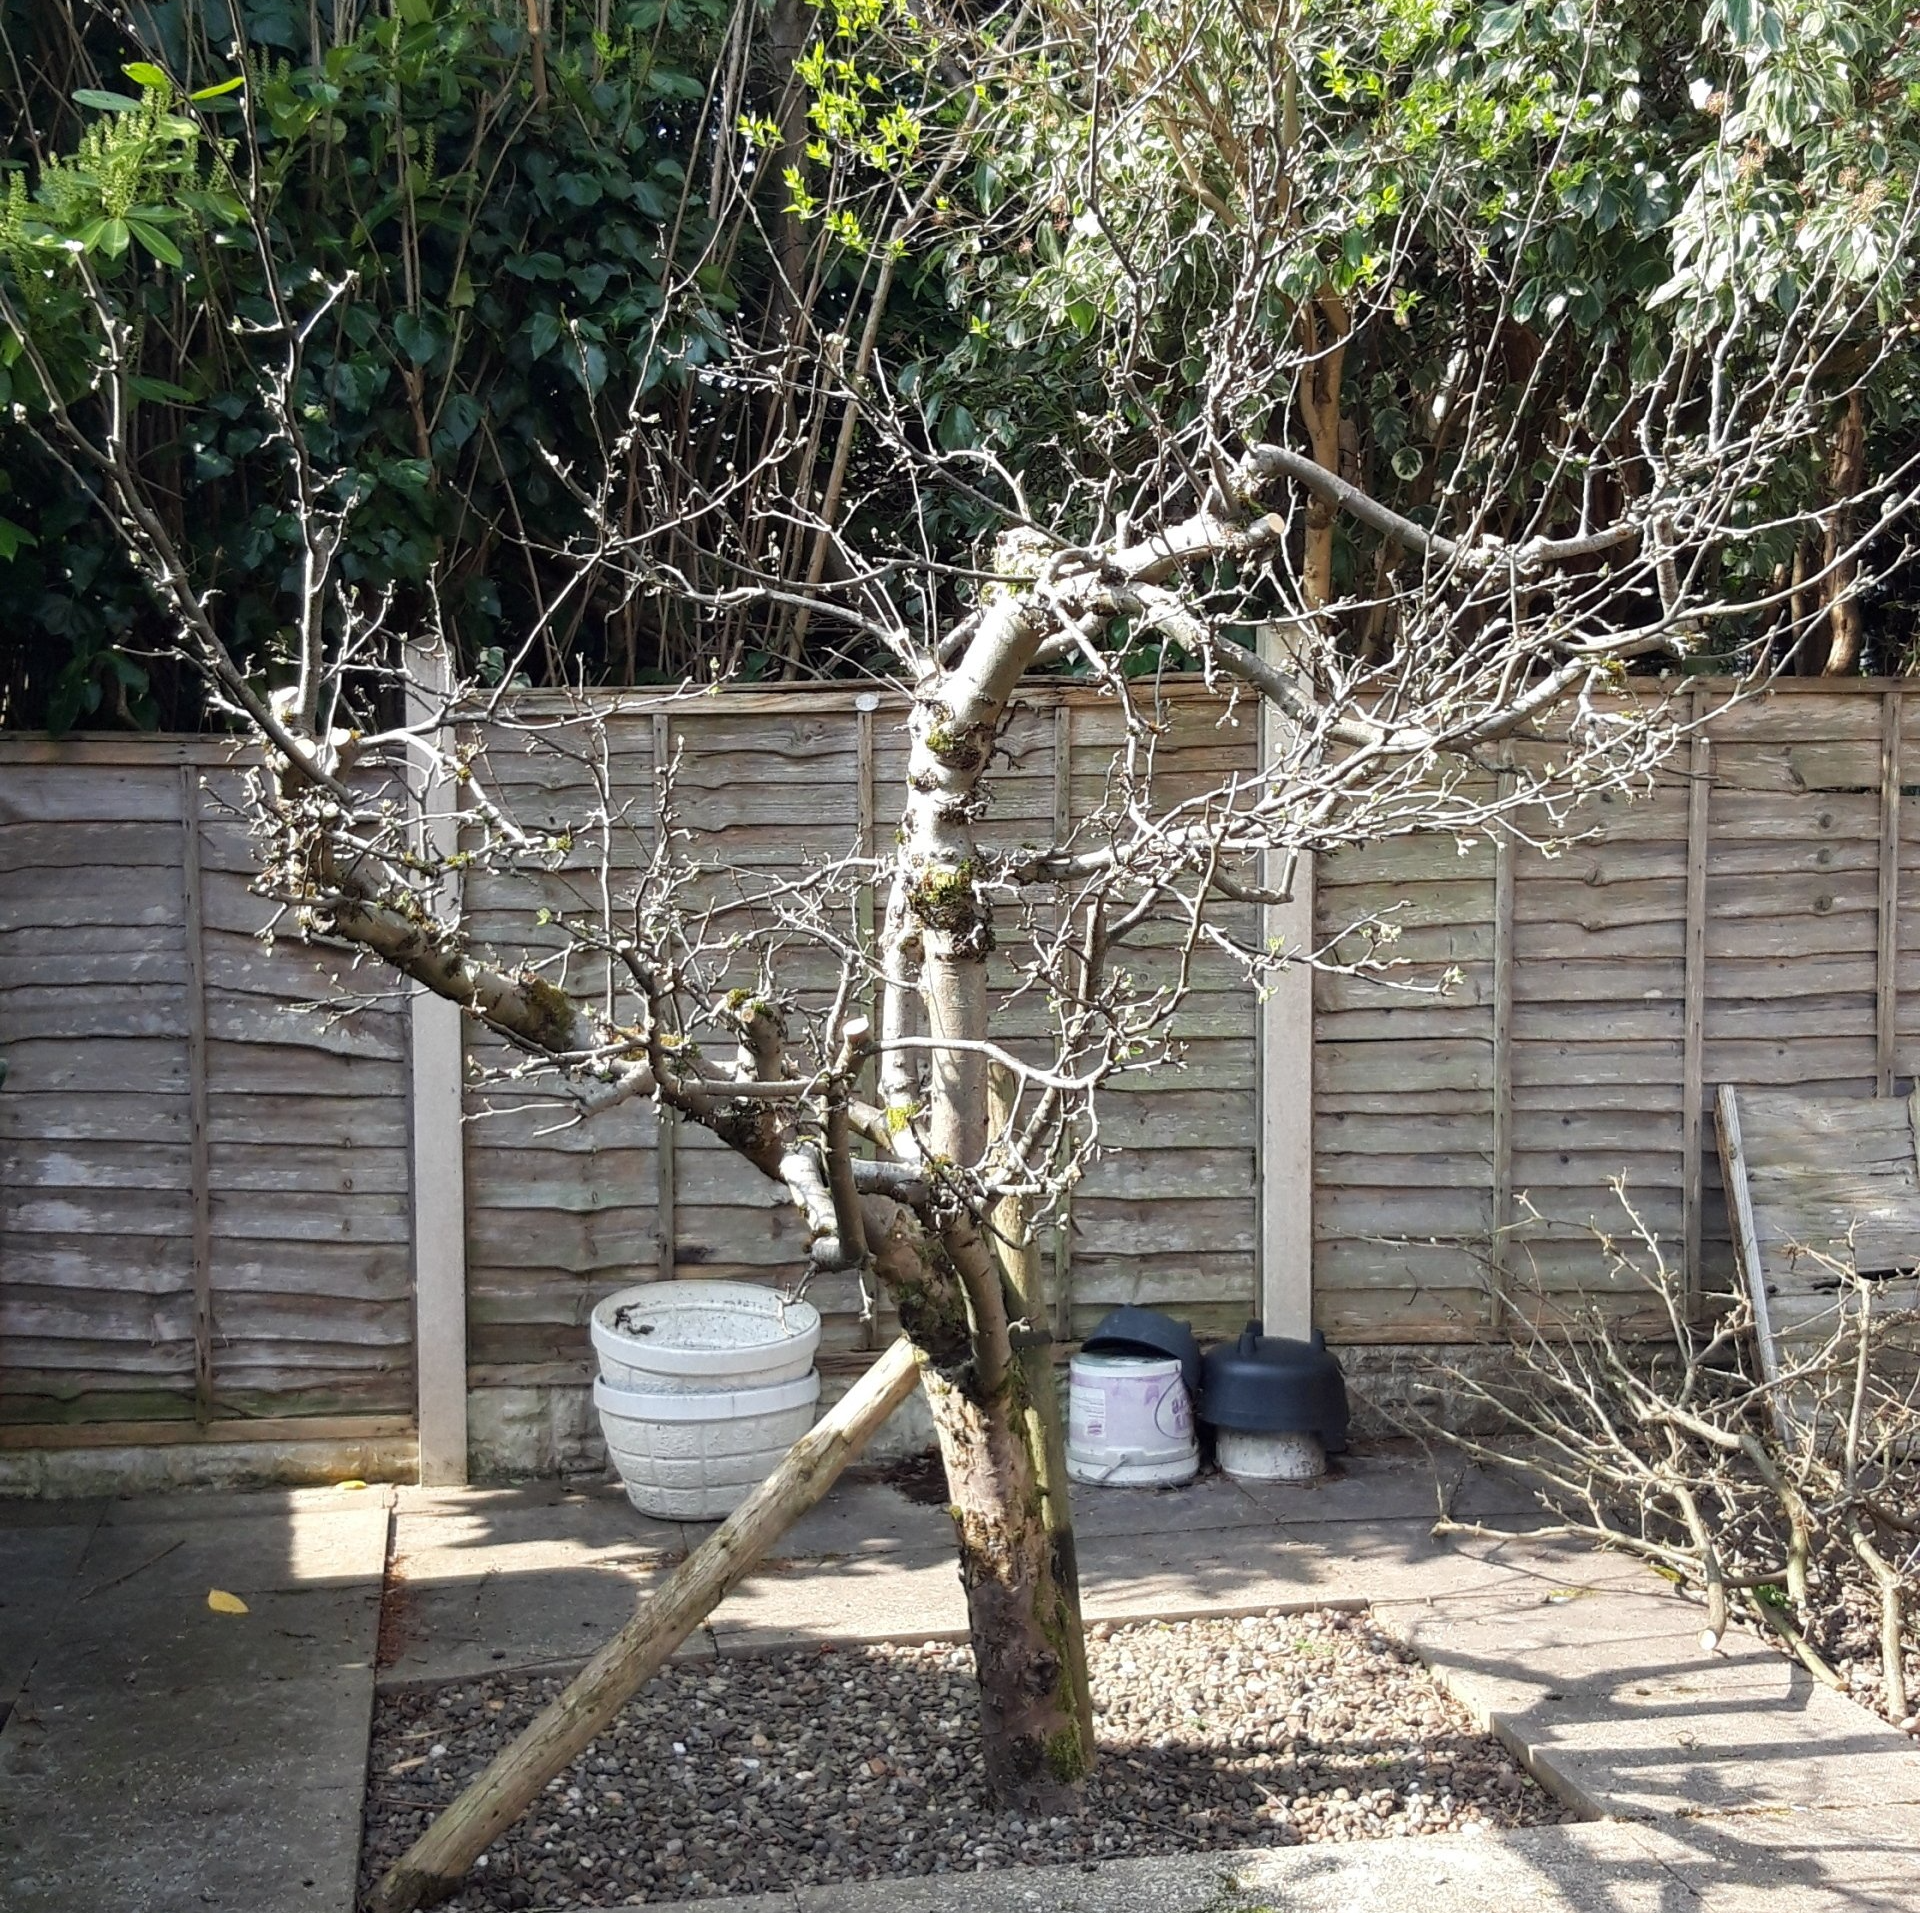 Our fruit tree maintenance services include tree pruning and weight reduction